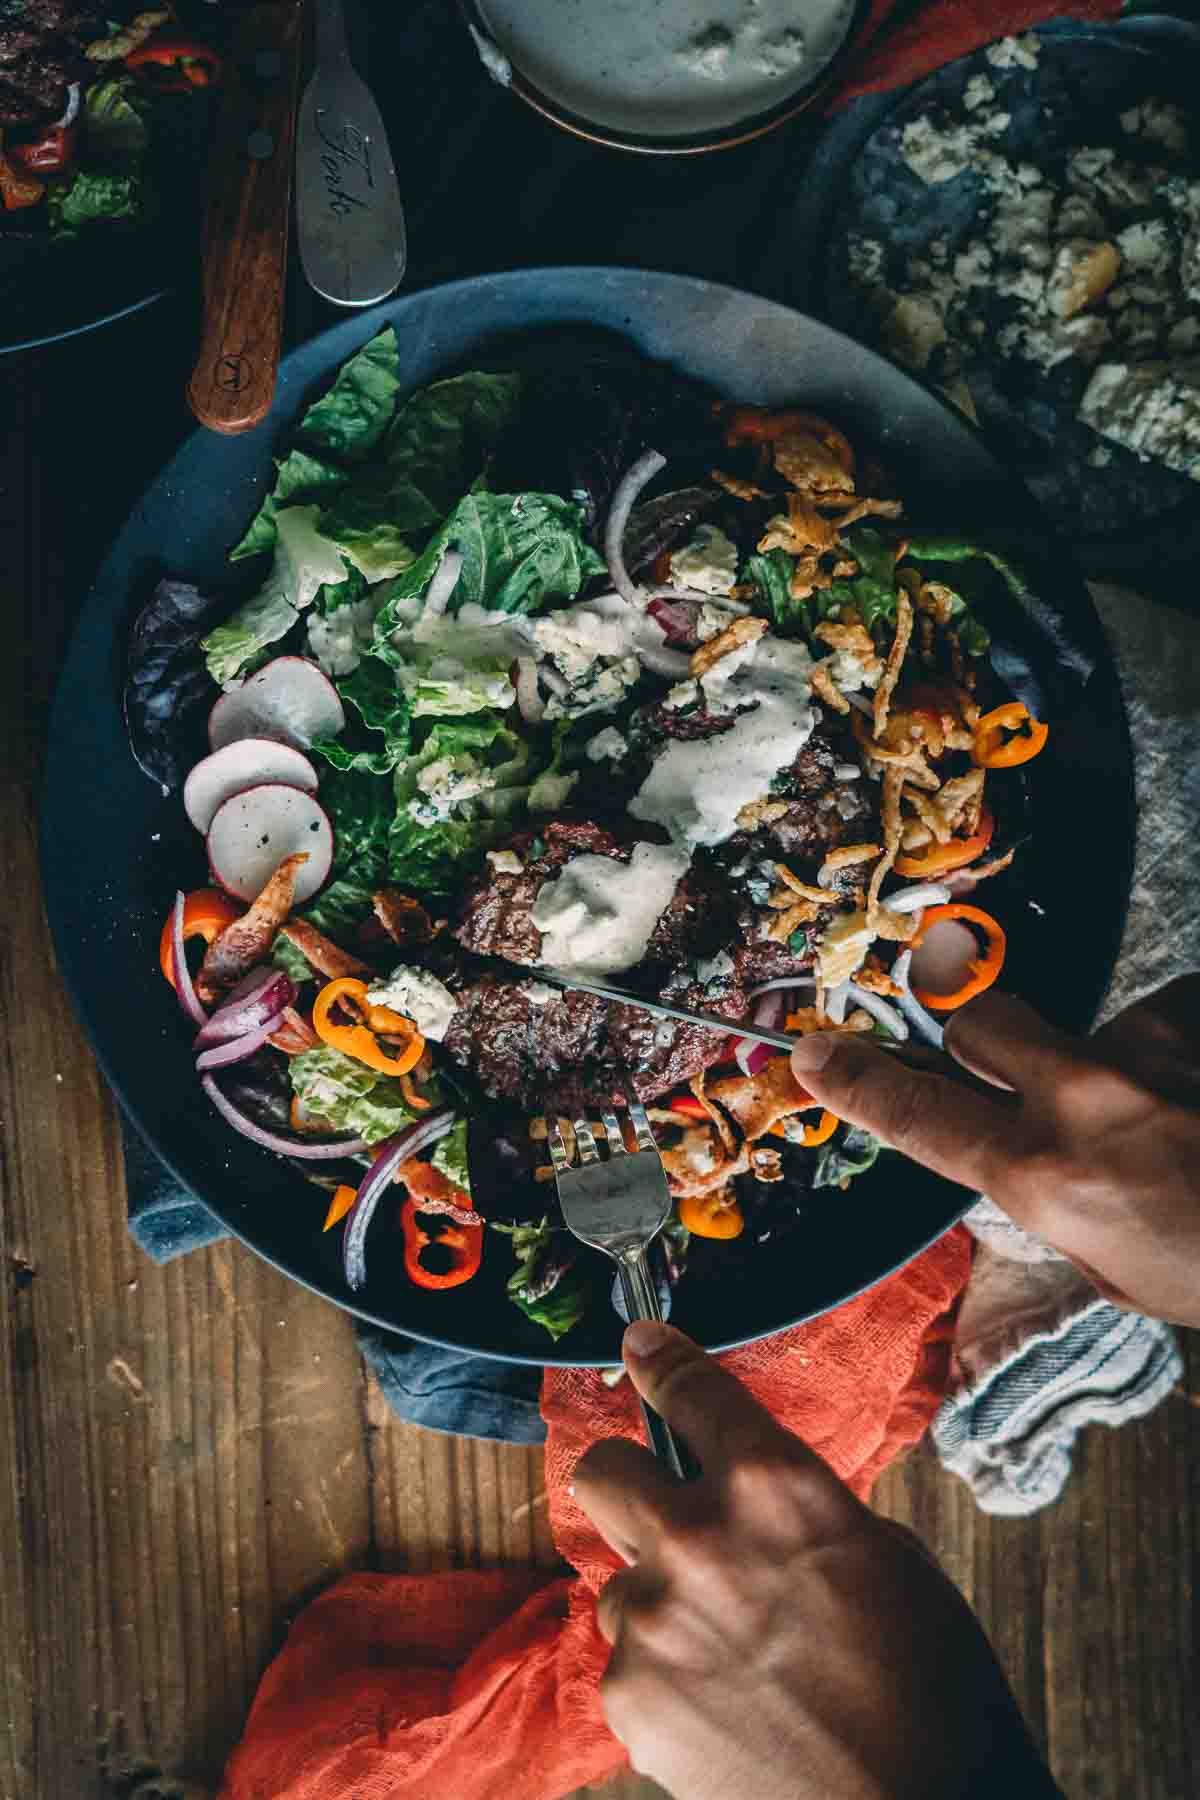 Overhead shots of hands slicing a burger over a salad with colorful vegetables. 